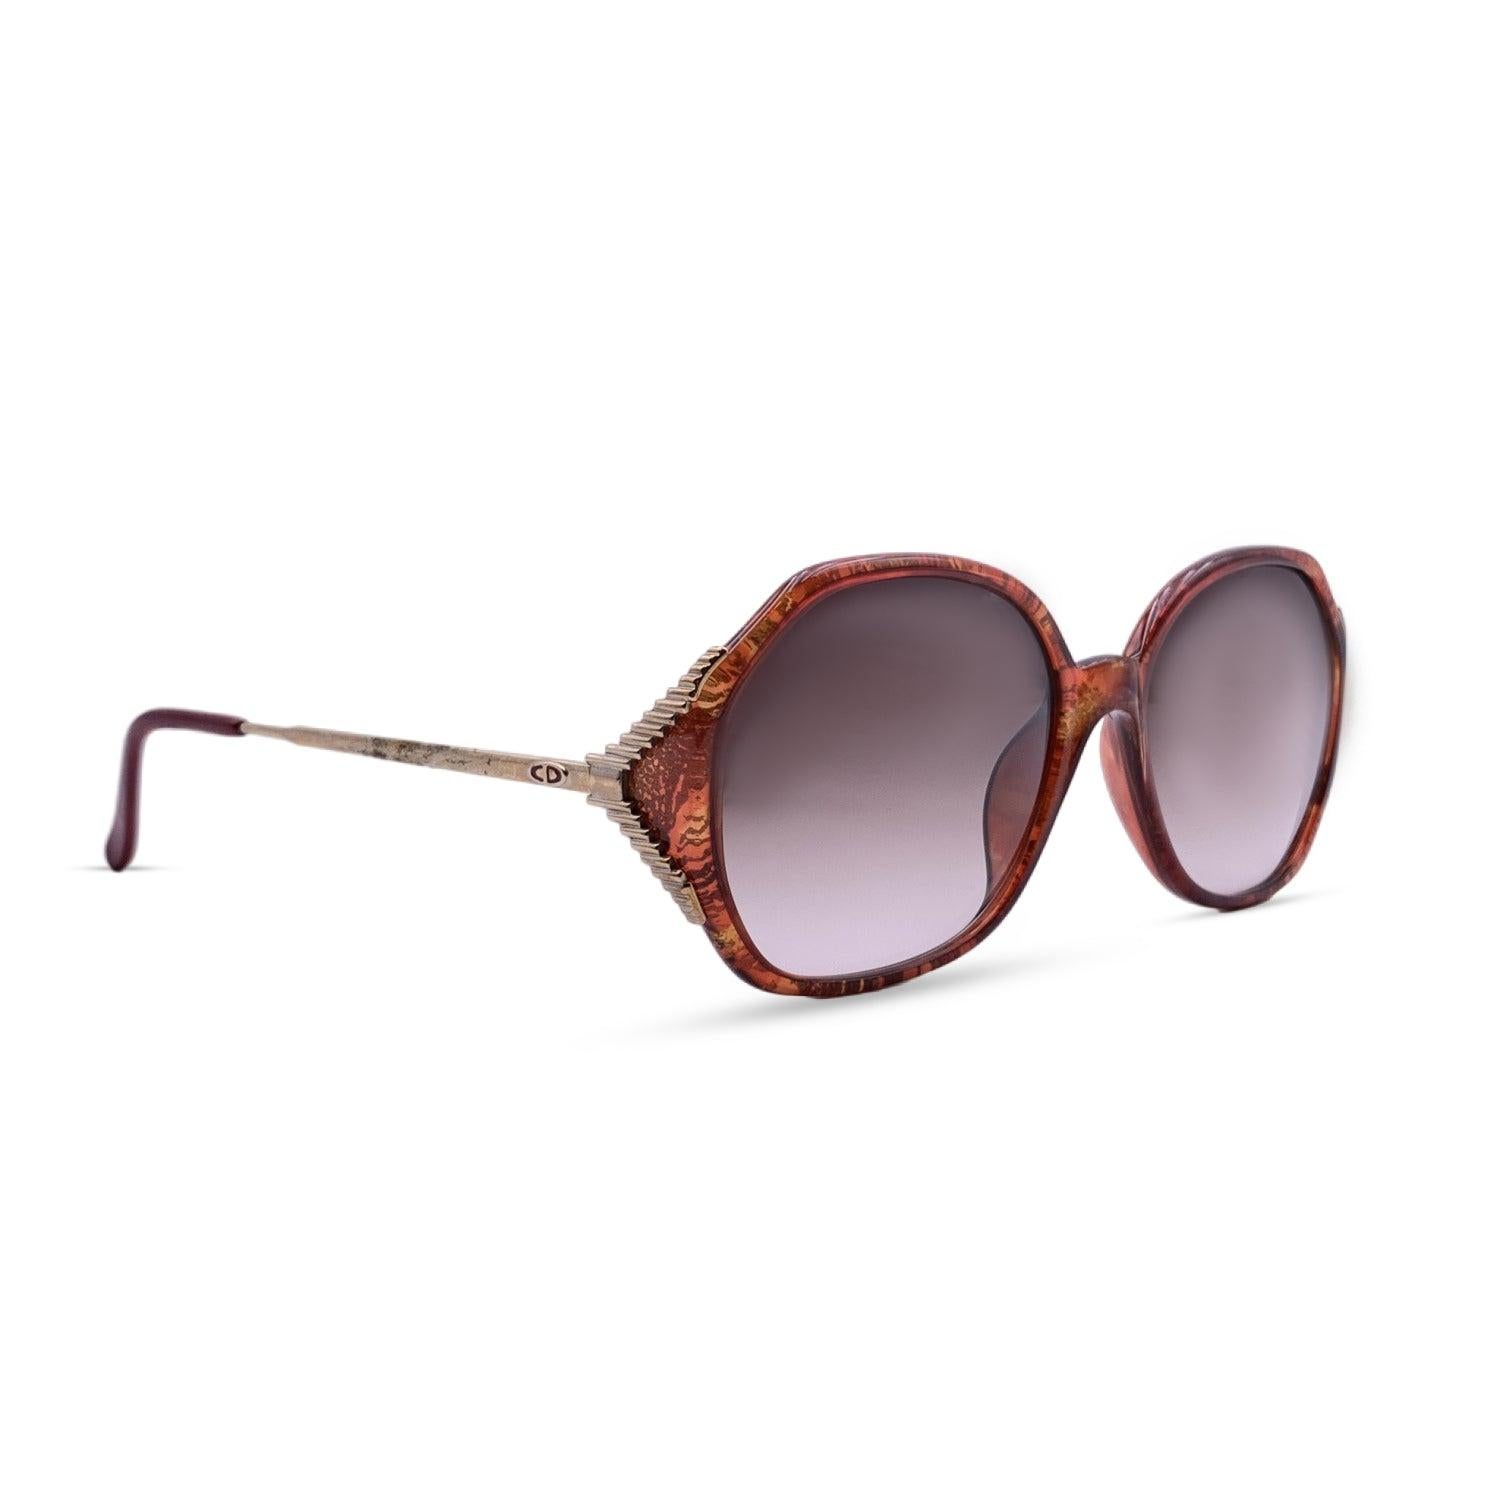 Christian Dior Vintage Women Sunglasses 2527 30 Optyl 58/18 130mm In Excellent Condition For Sale In Rome, Rome